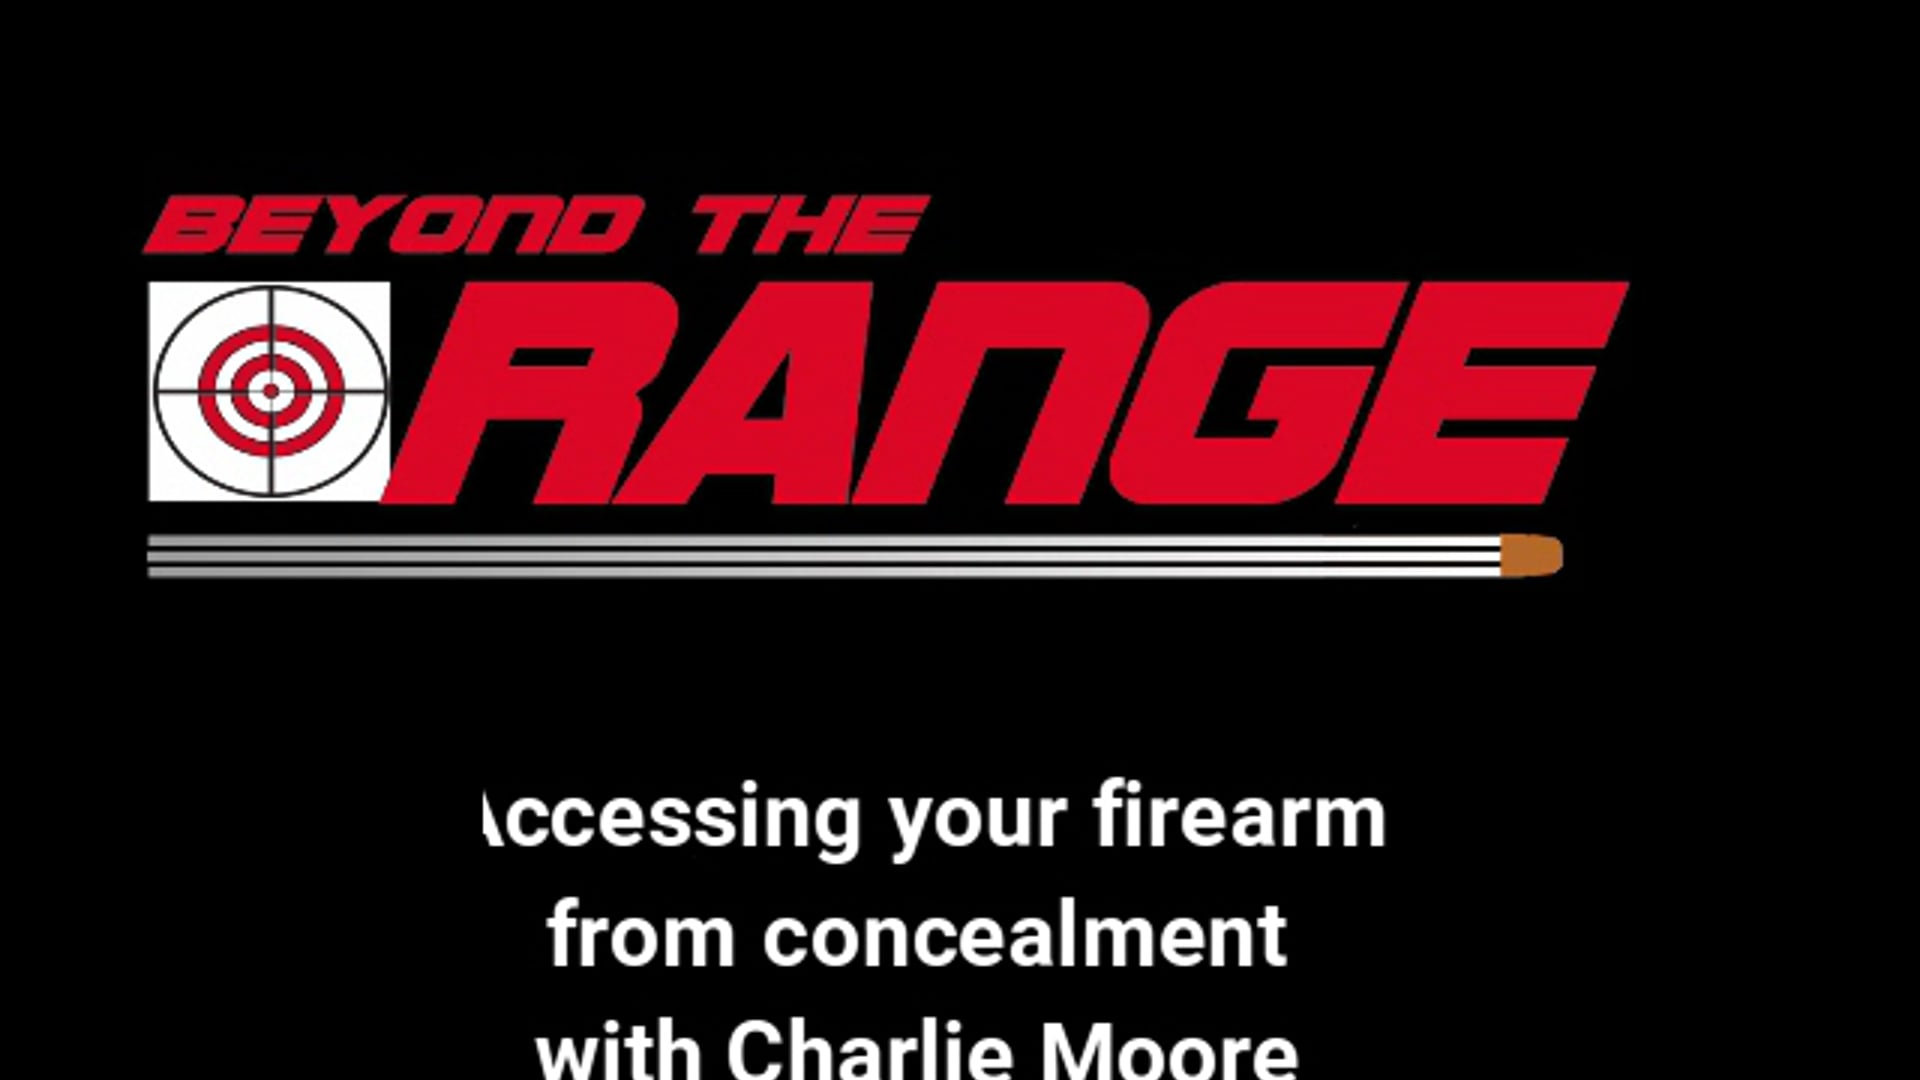 Accessing your firearm with Charlie Moore